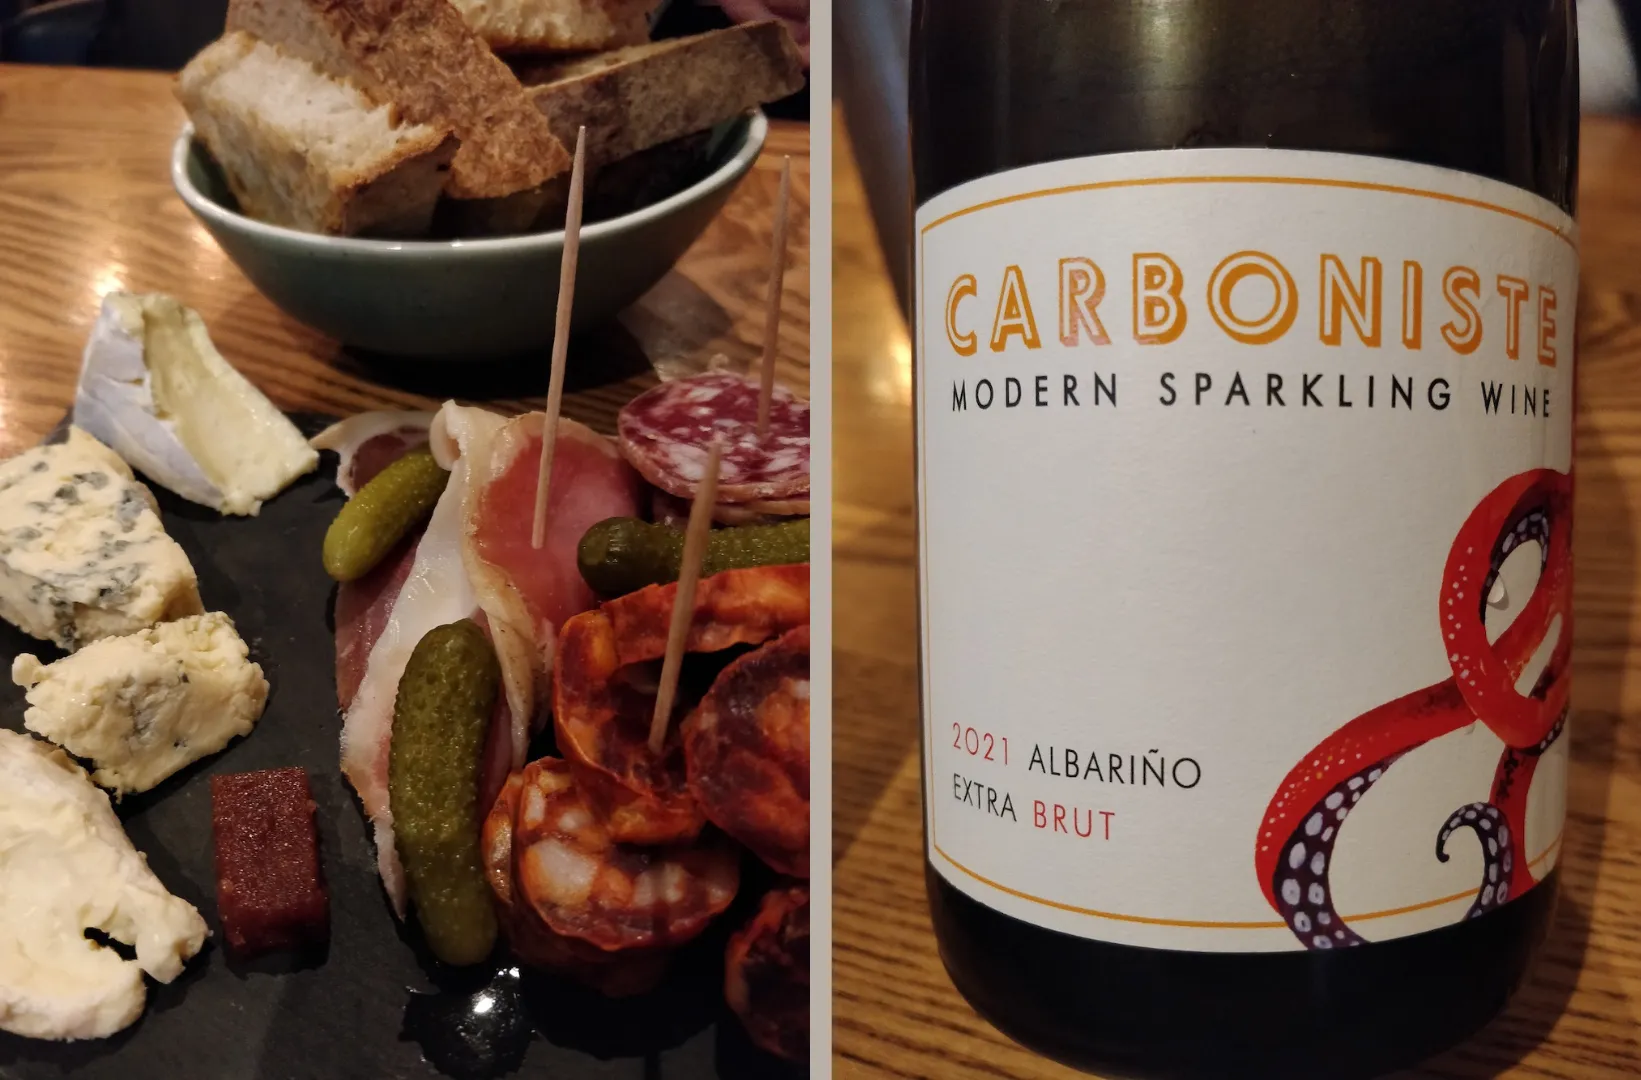 Cheese and charcuterie board with bread next to a photo of a label on a wine bottle: Carboniste - Modern Sparkling Wine